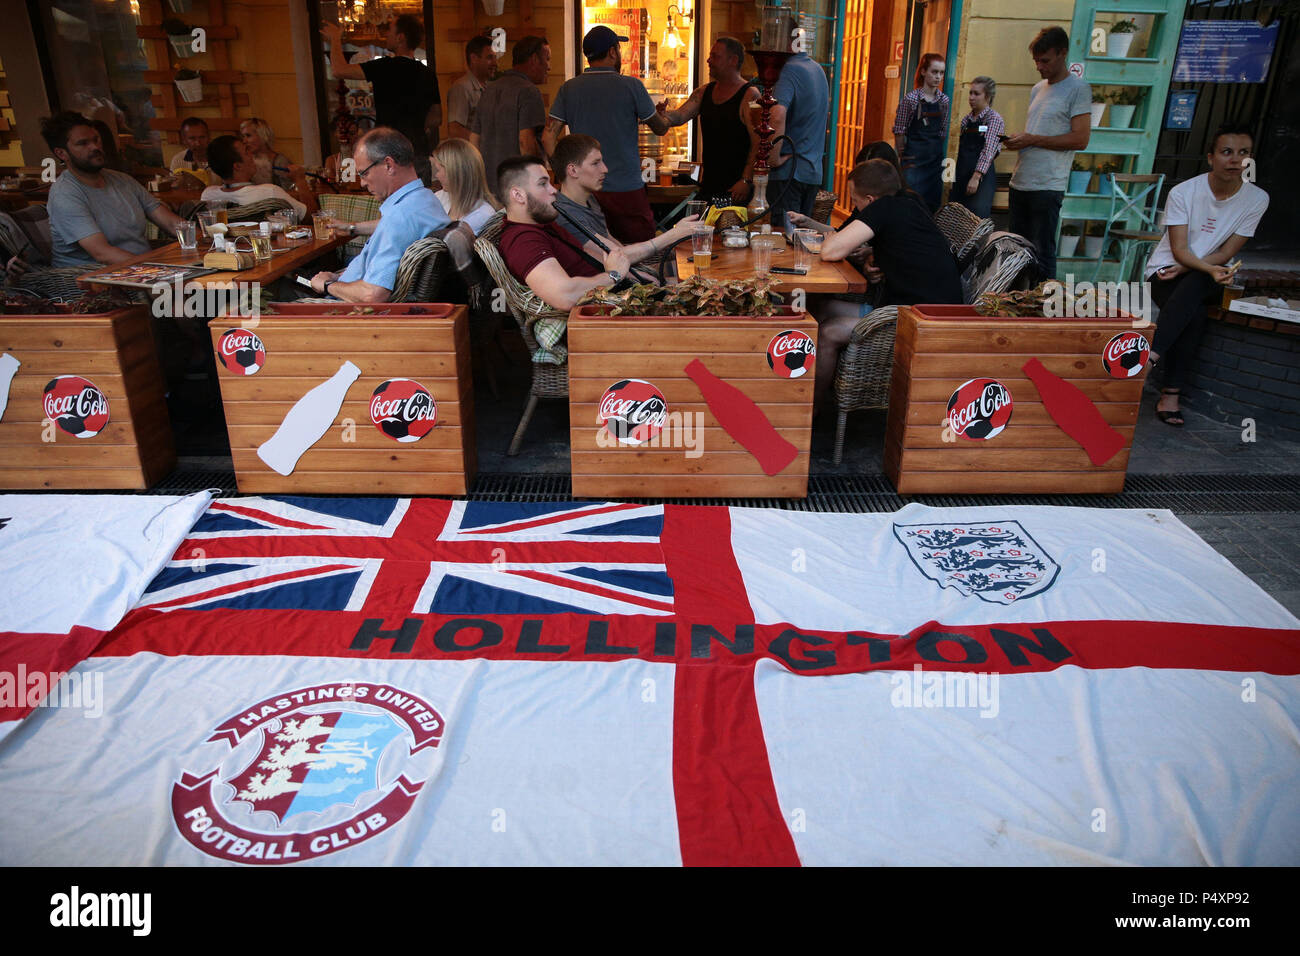 England fans in a bar in Nizhny Novgorod ahead of the match on Sunday against Panama at the 2018 FIFA World Cup in Russia. Stock Photo